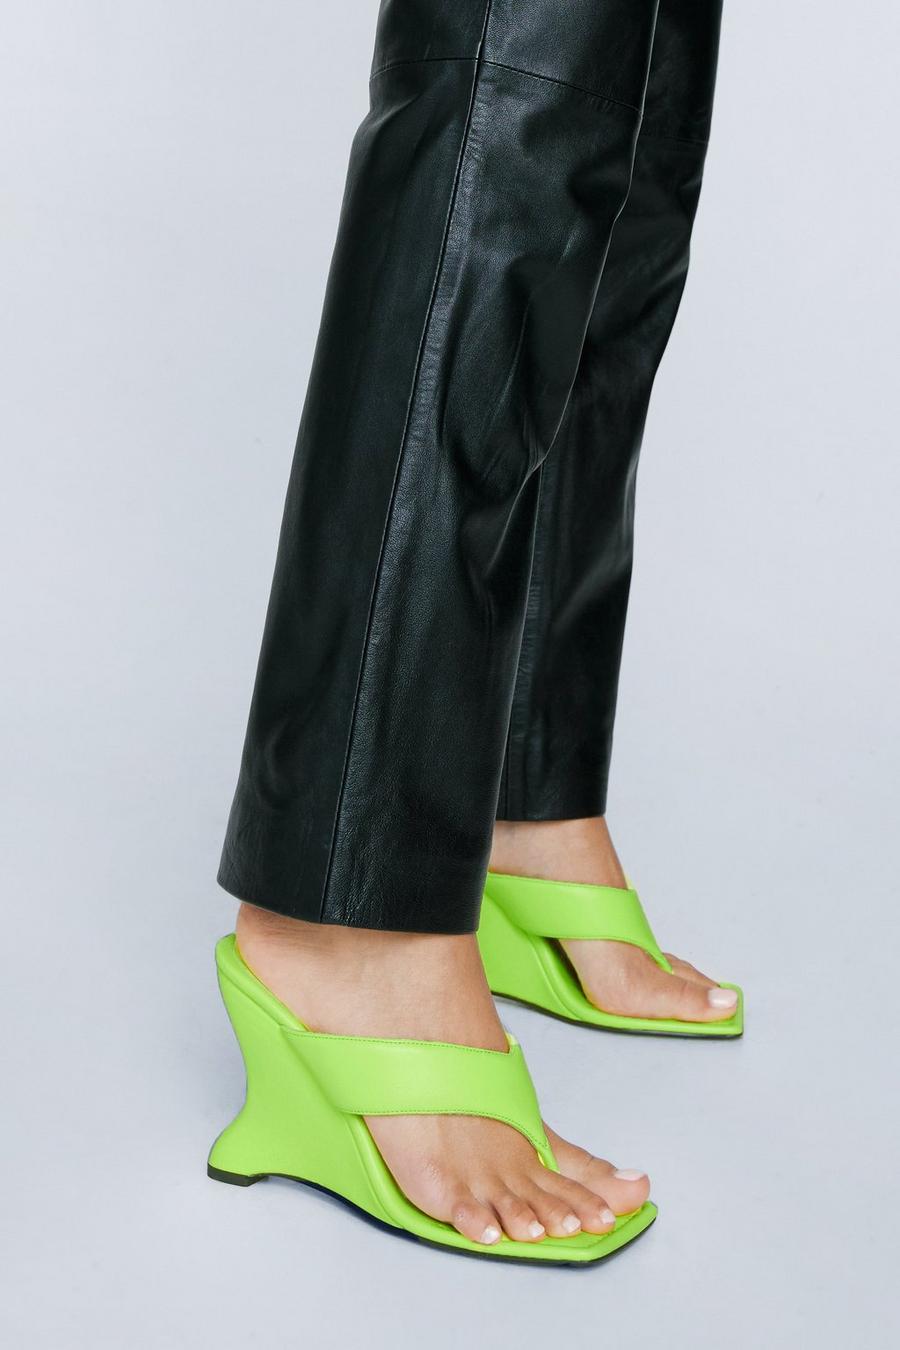 Lime Faux Leather Flip Flop Wedge Heels